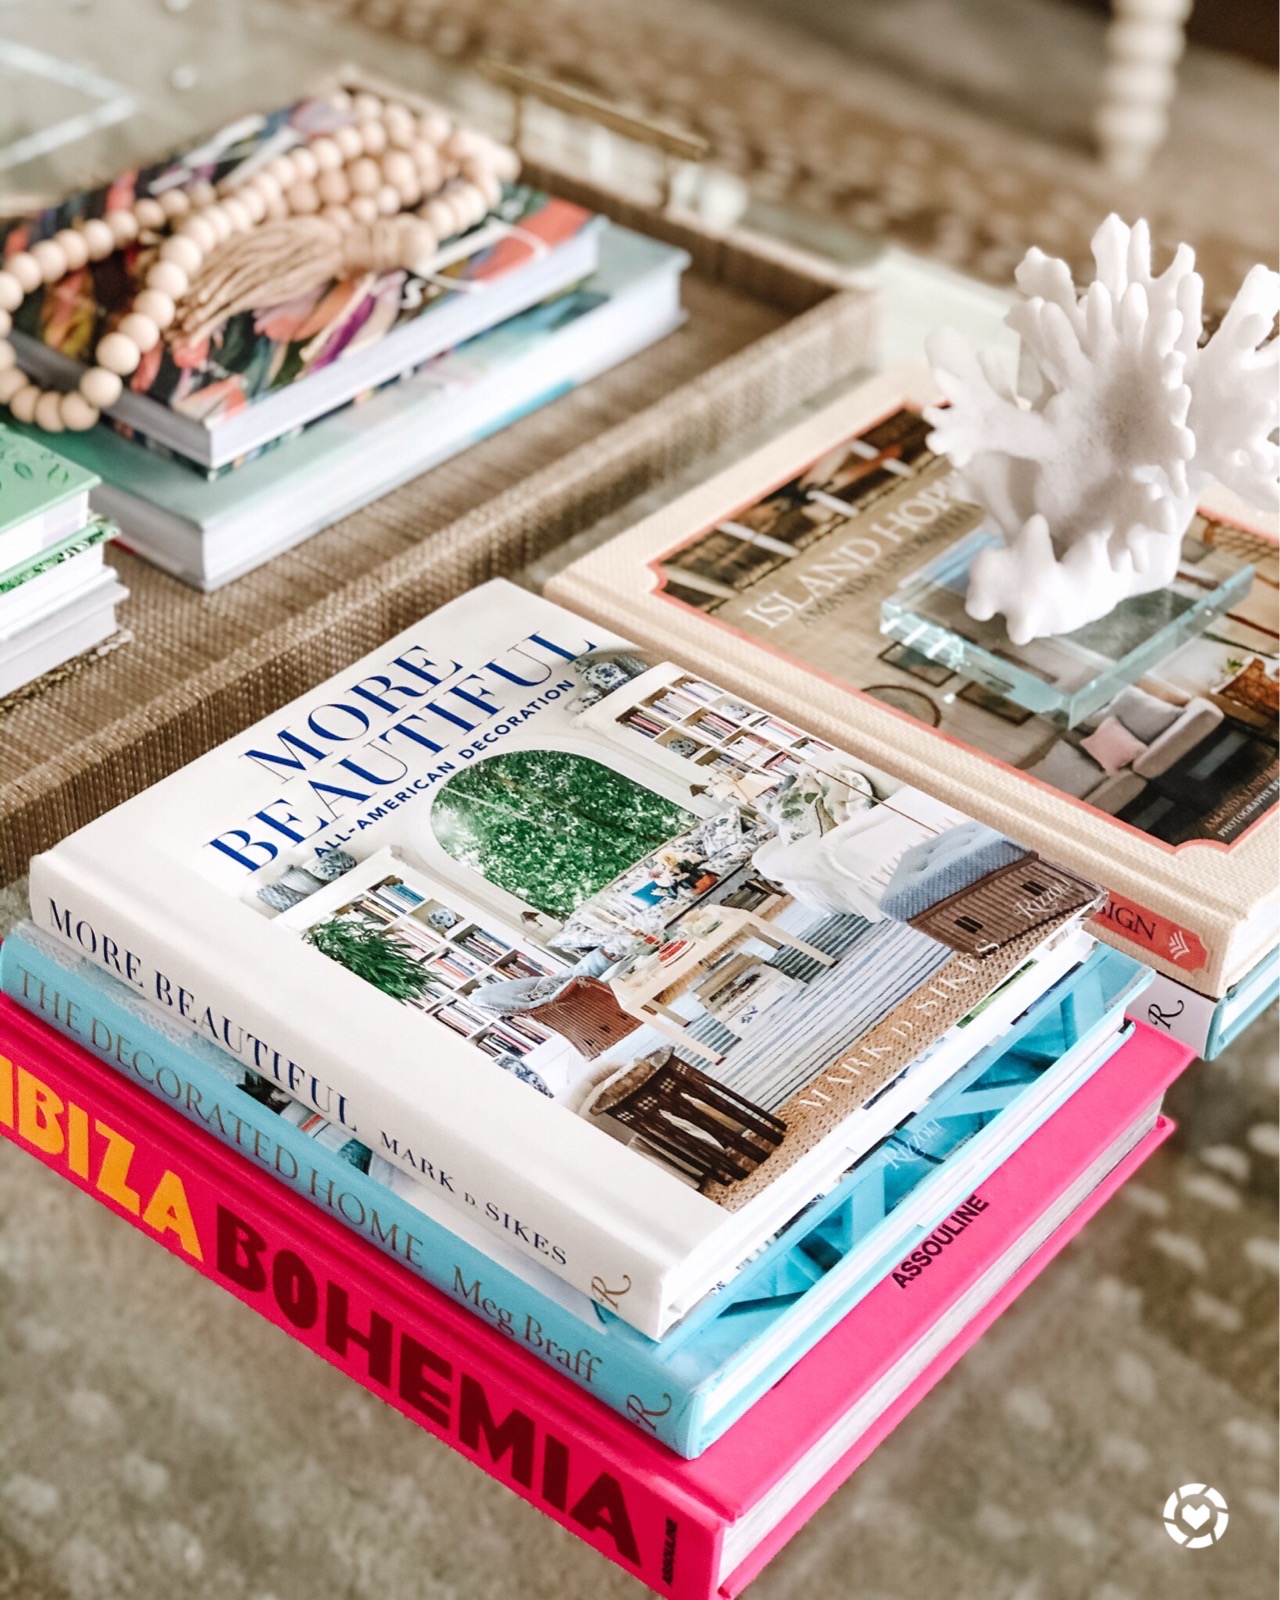 The Best Coffee Table Books on Design, Art, and Photography